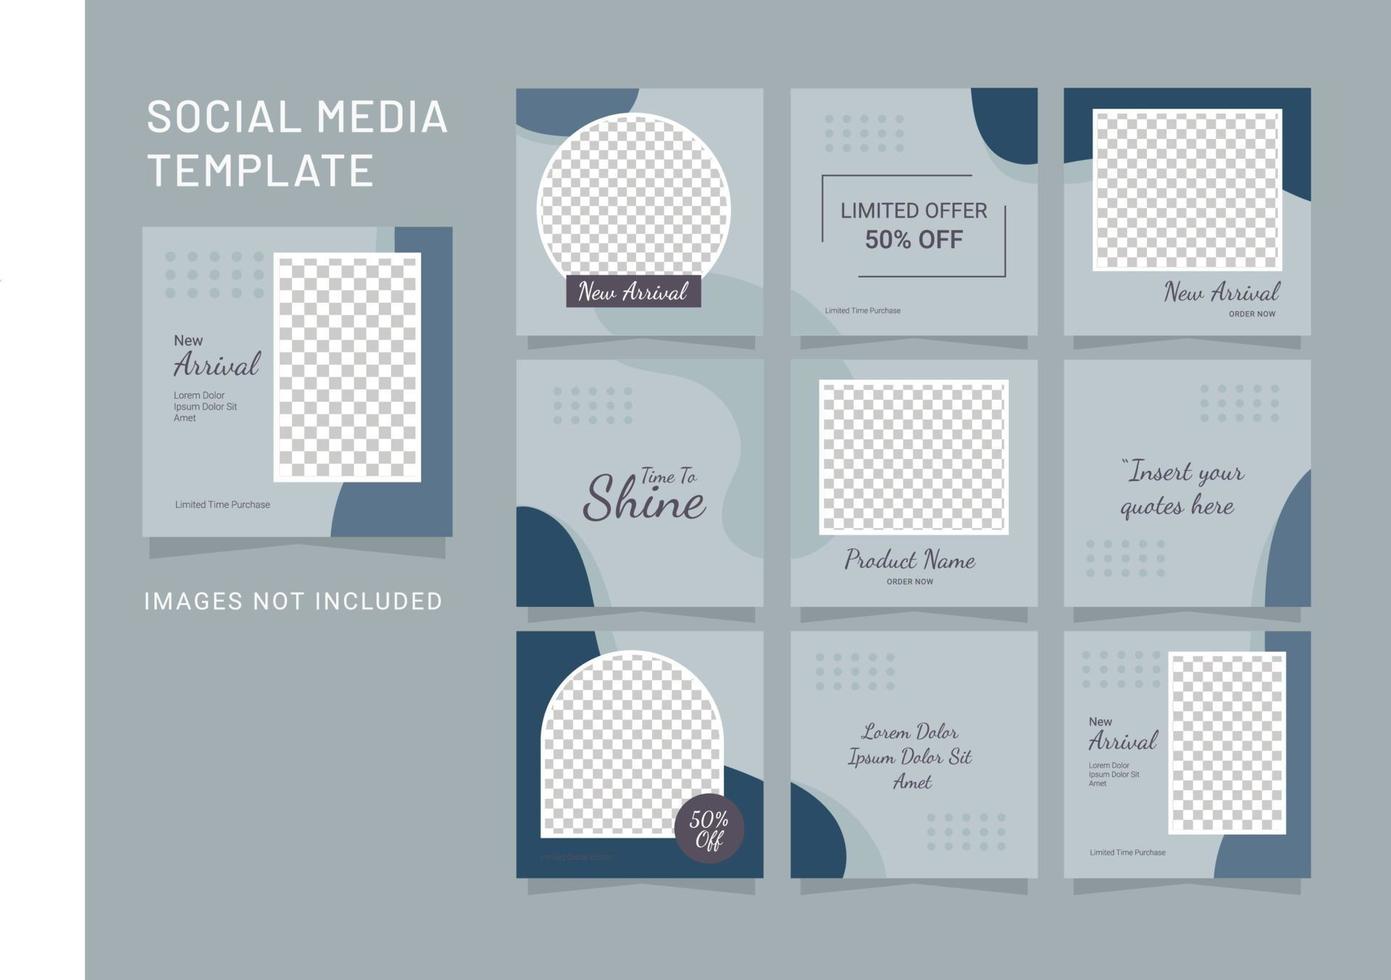 Social Media Feed Fashion Women Template Puzzle vector